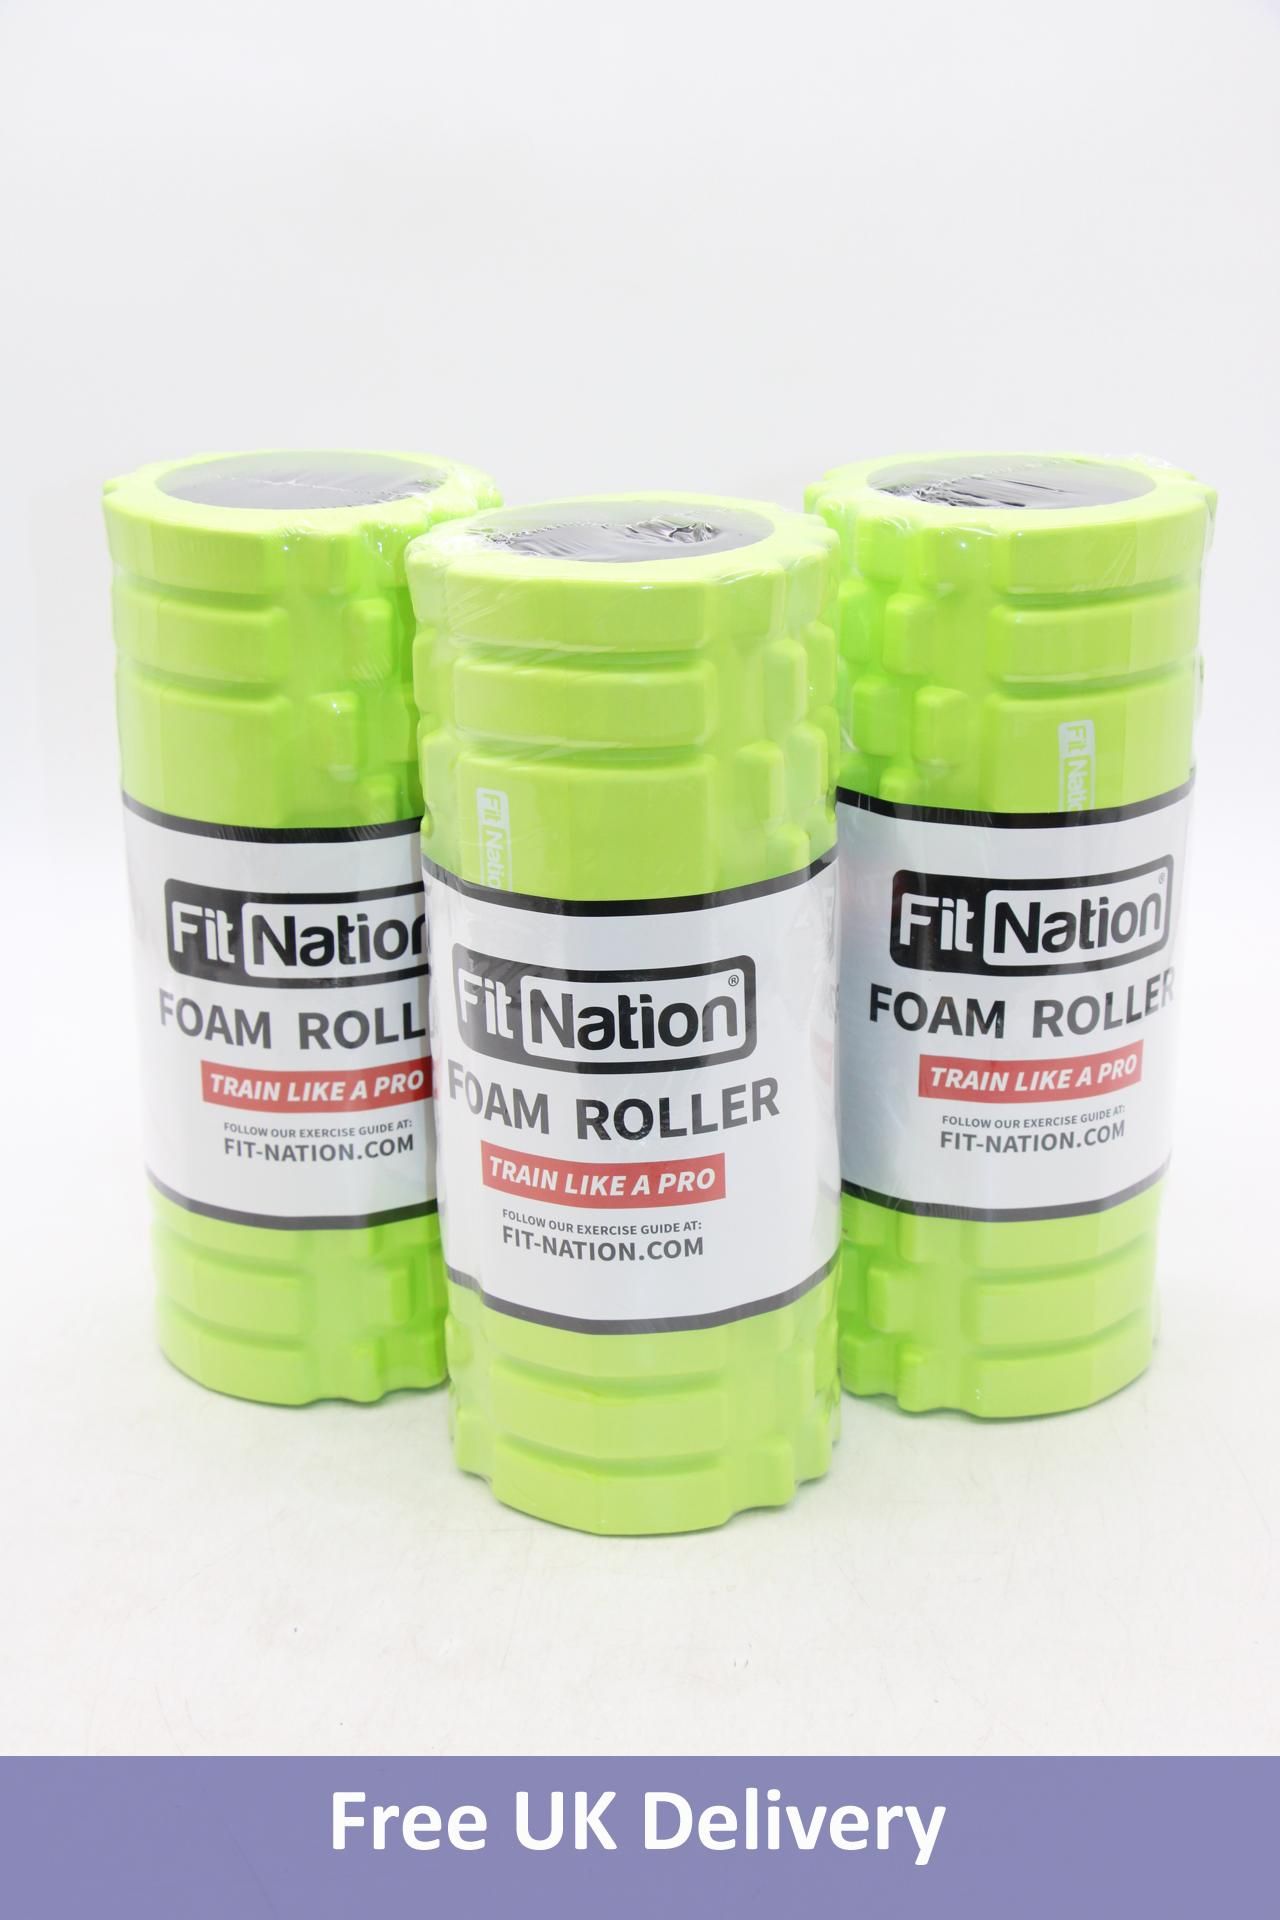 Three Fit Nation Foam Roller for Muscle Massage, Lime, Size 33 x 14 x 14 Centimetre